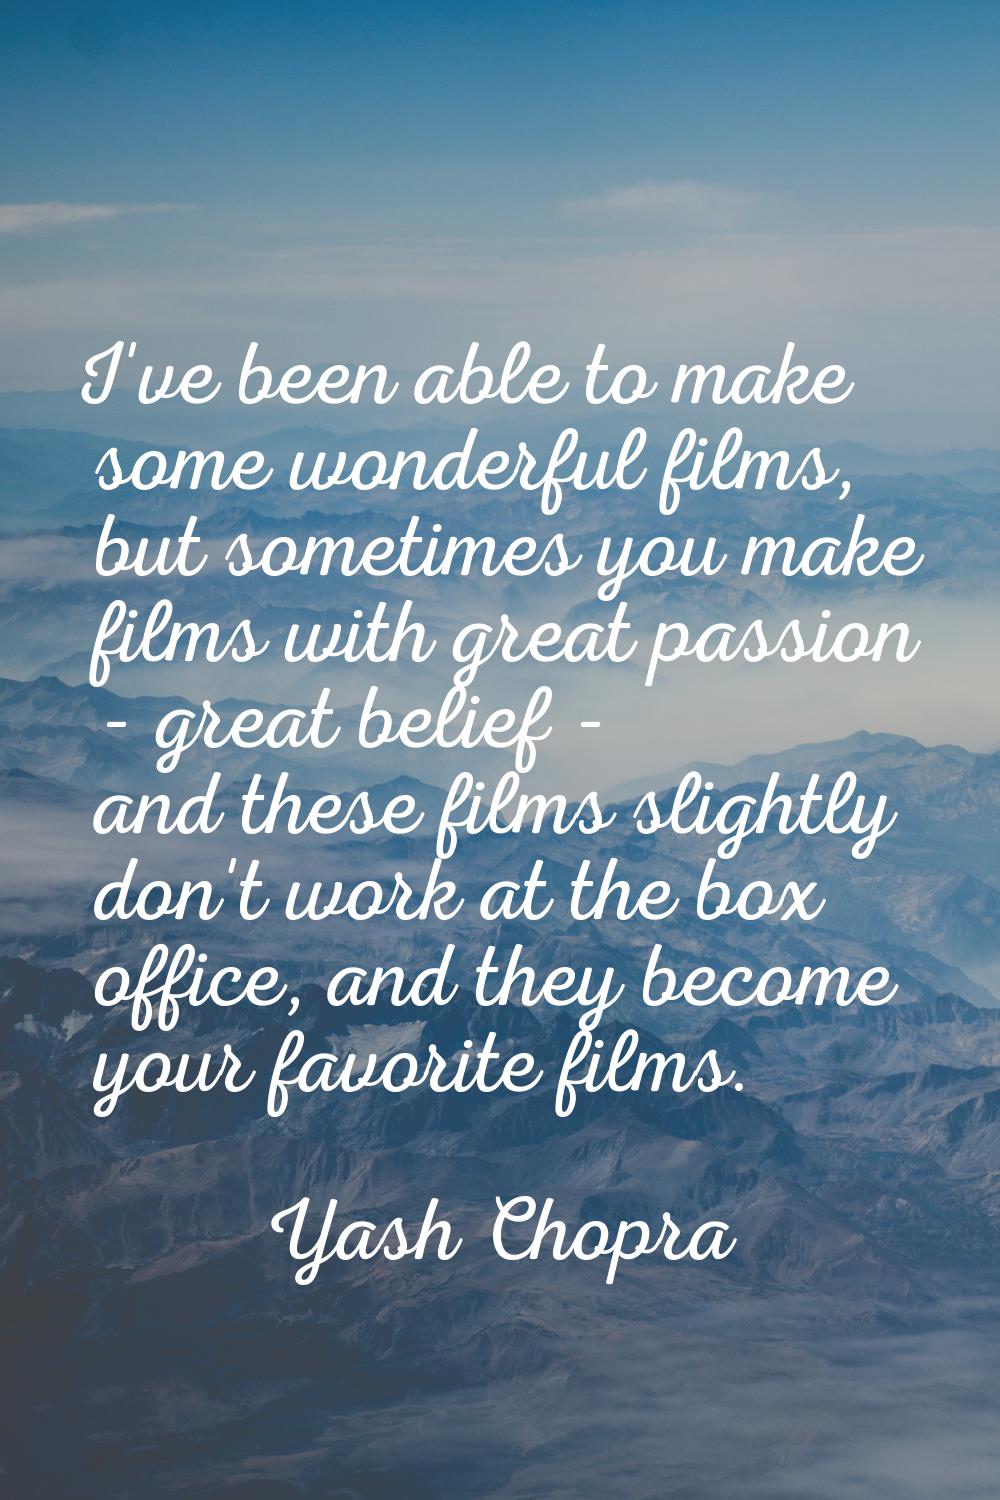 I've been able to make some wonderful films, but sometimes you make films with great passion - grea